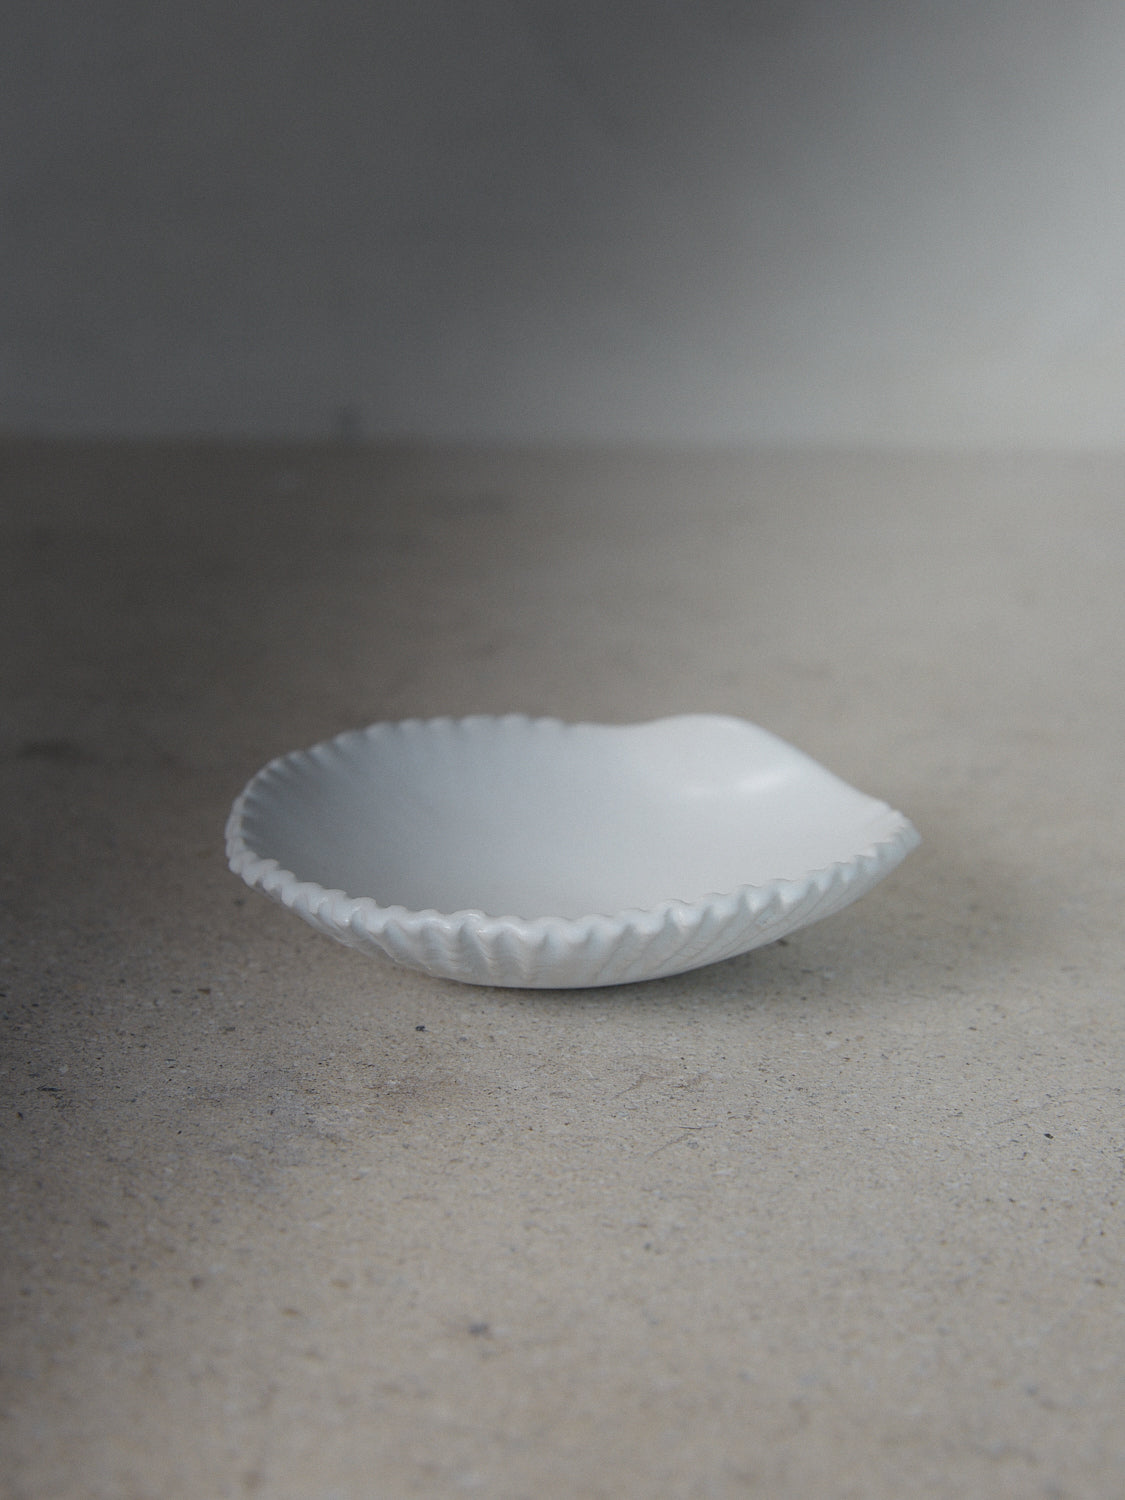 Raw Shell Dish. A hand-formed, stoneware dish recalling the sea in a classic matte white finish. 